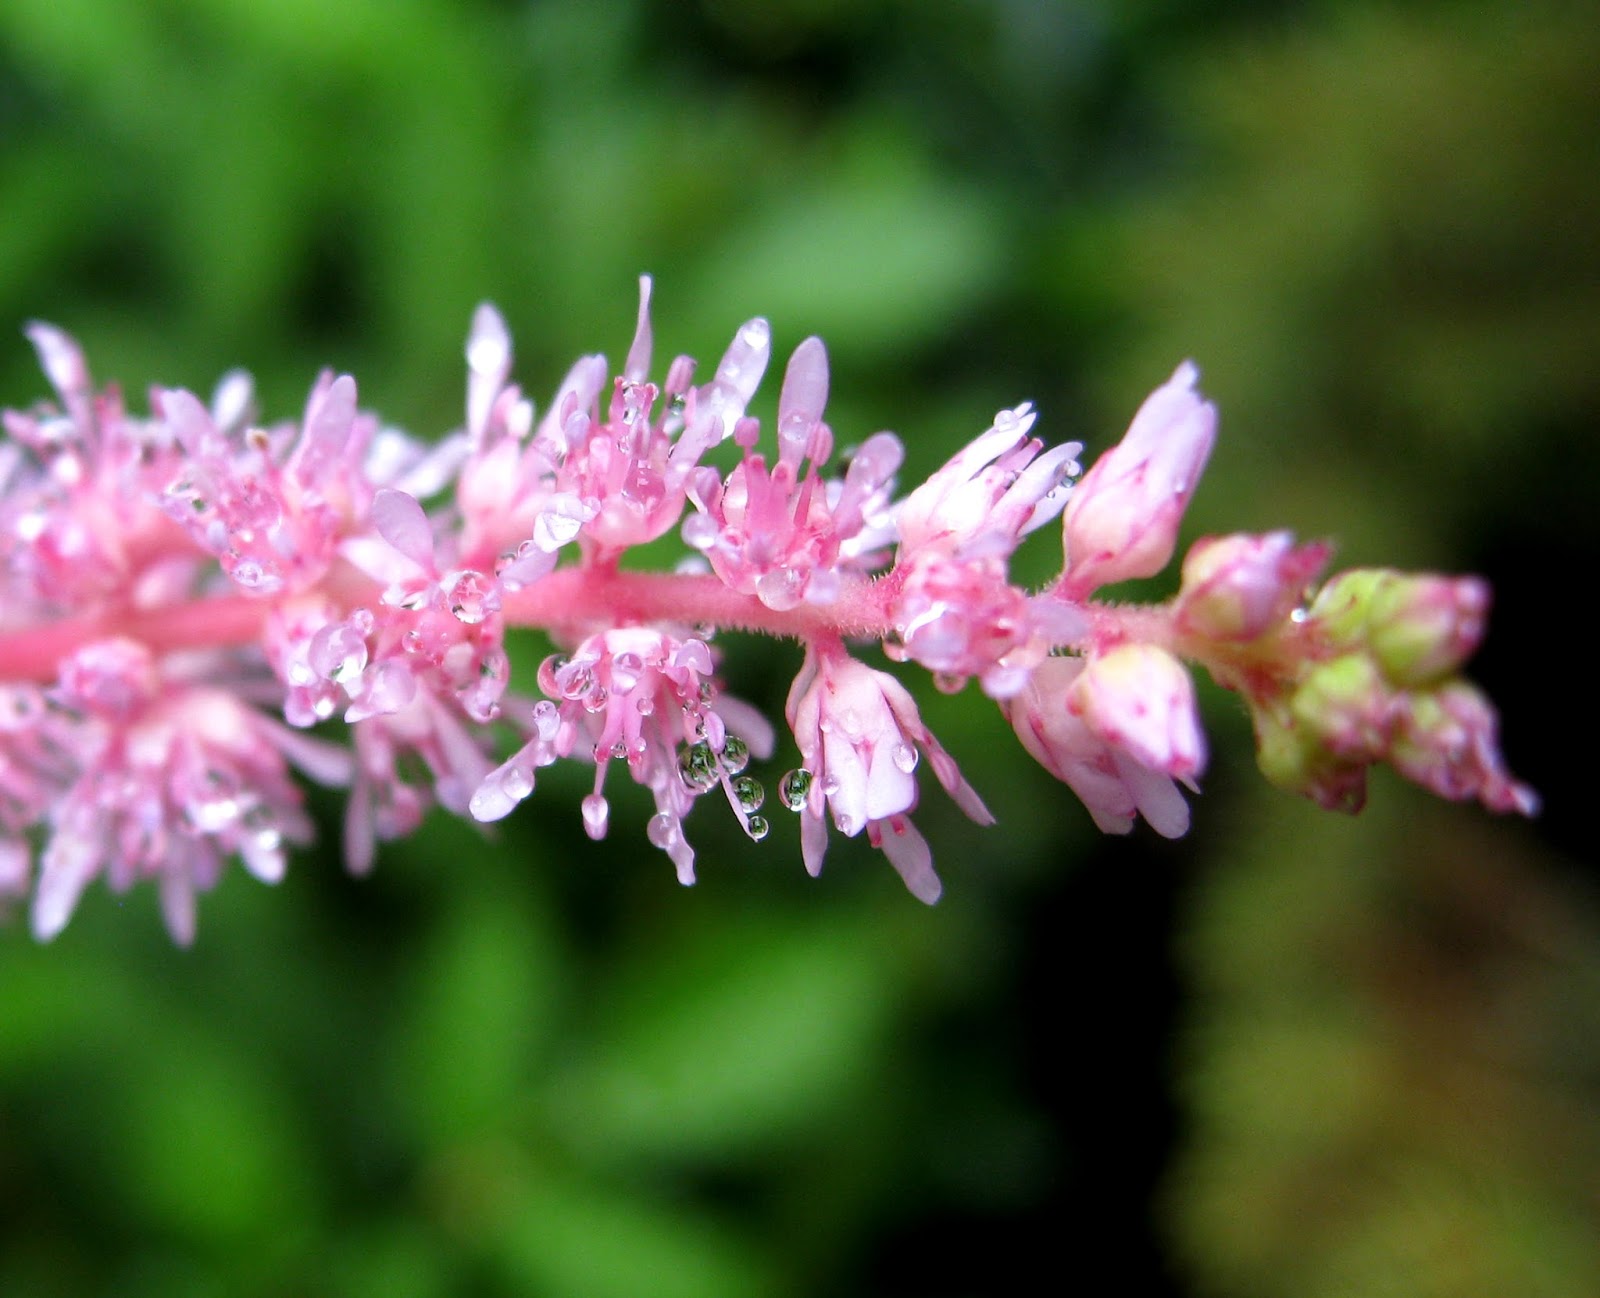 Image Astilbe_with_dew.jpg free for use with attribution